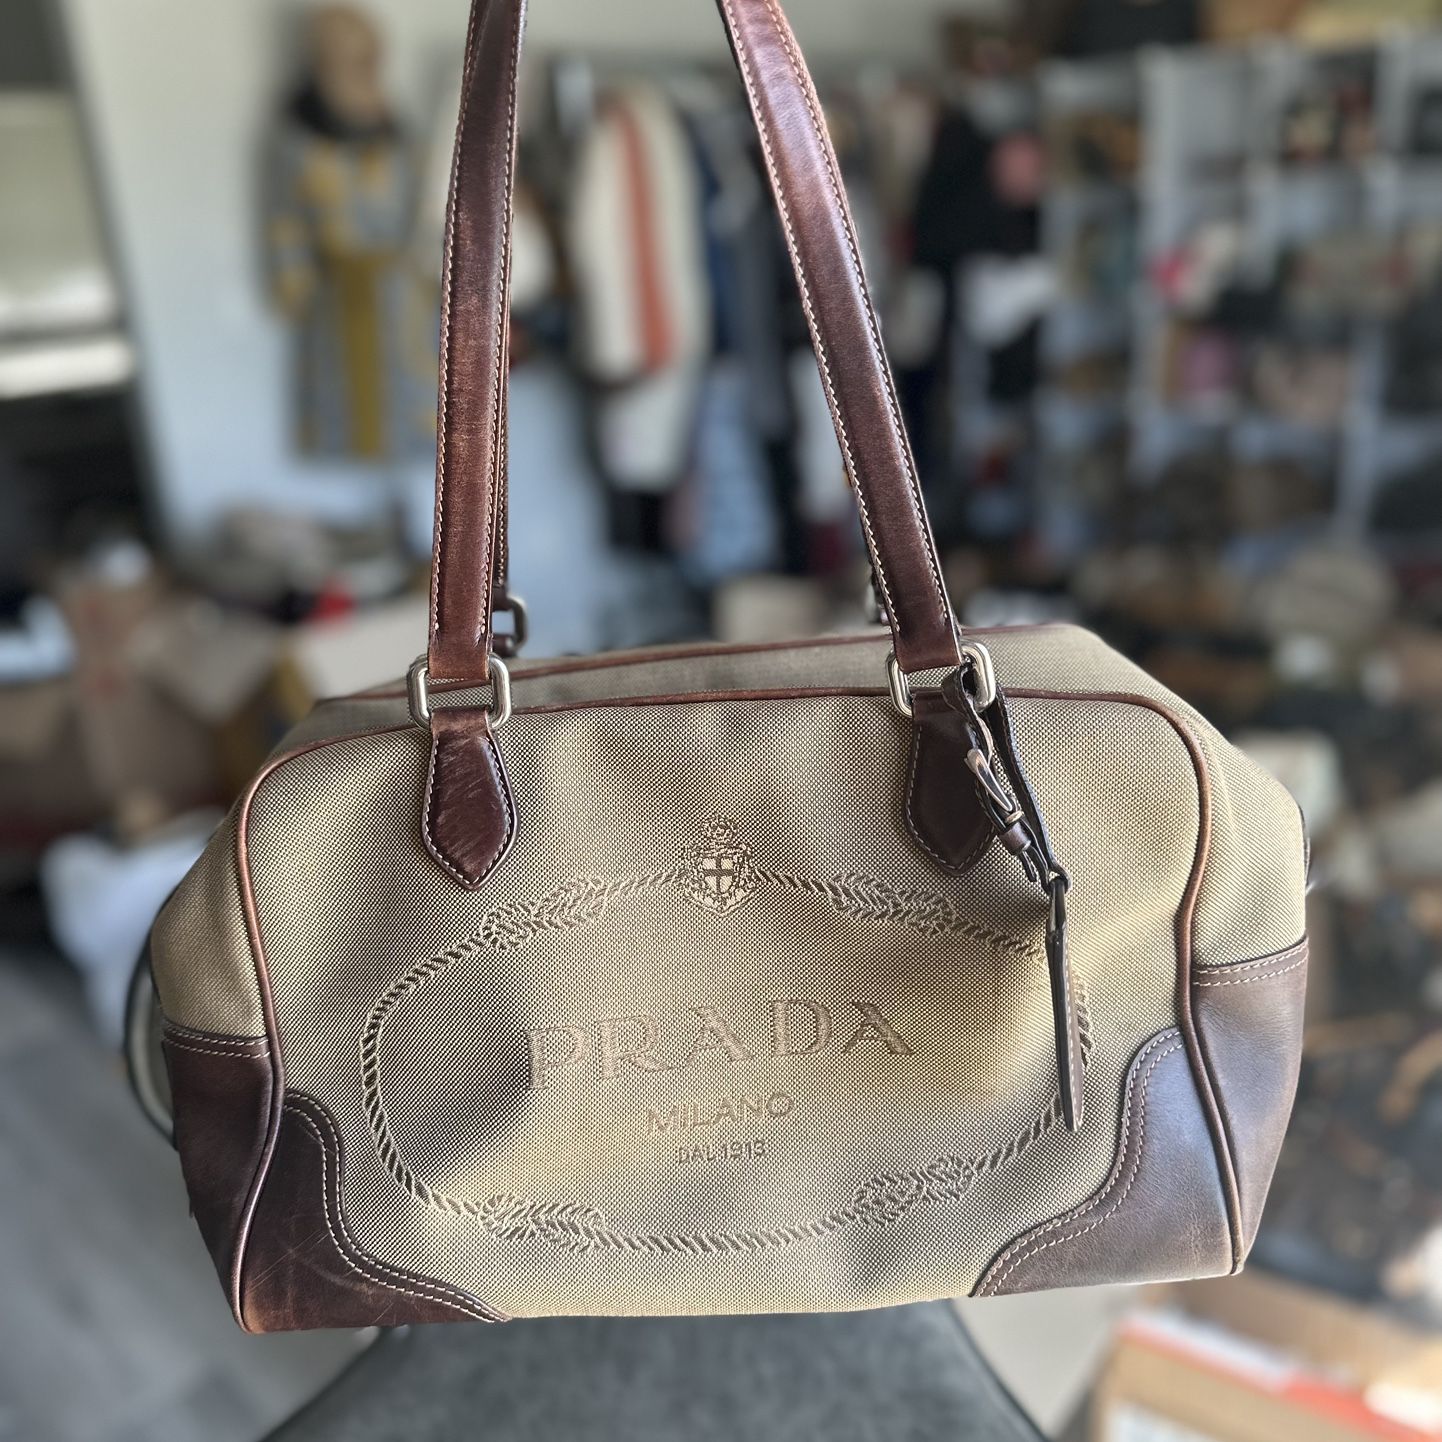 Vintage Prada Bag for Sale in Tracy, CA - OfferUp